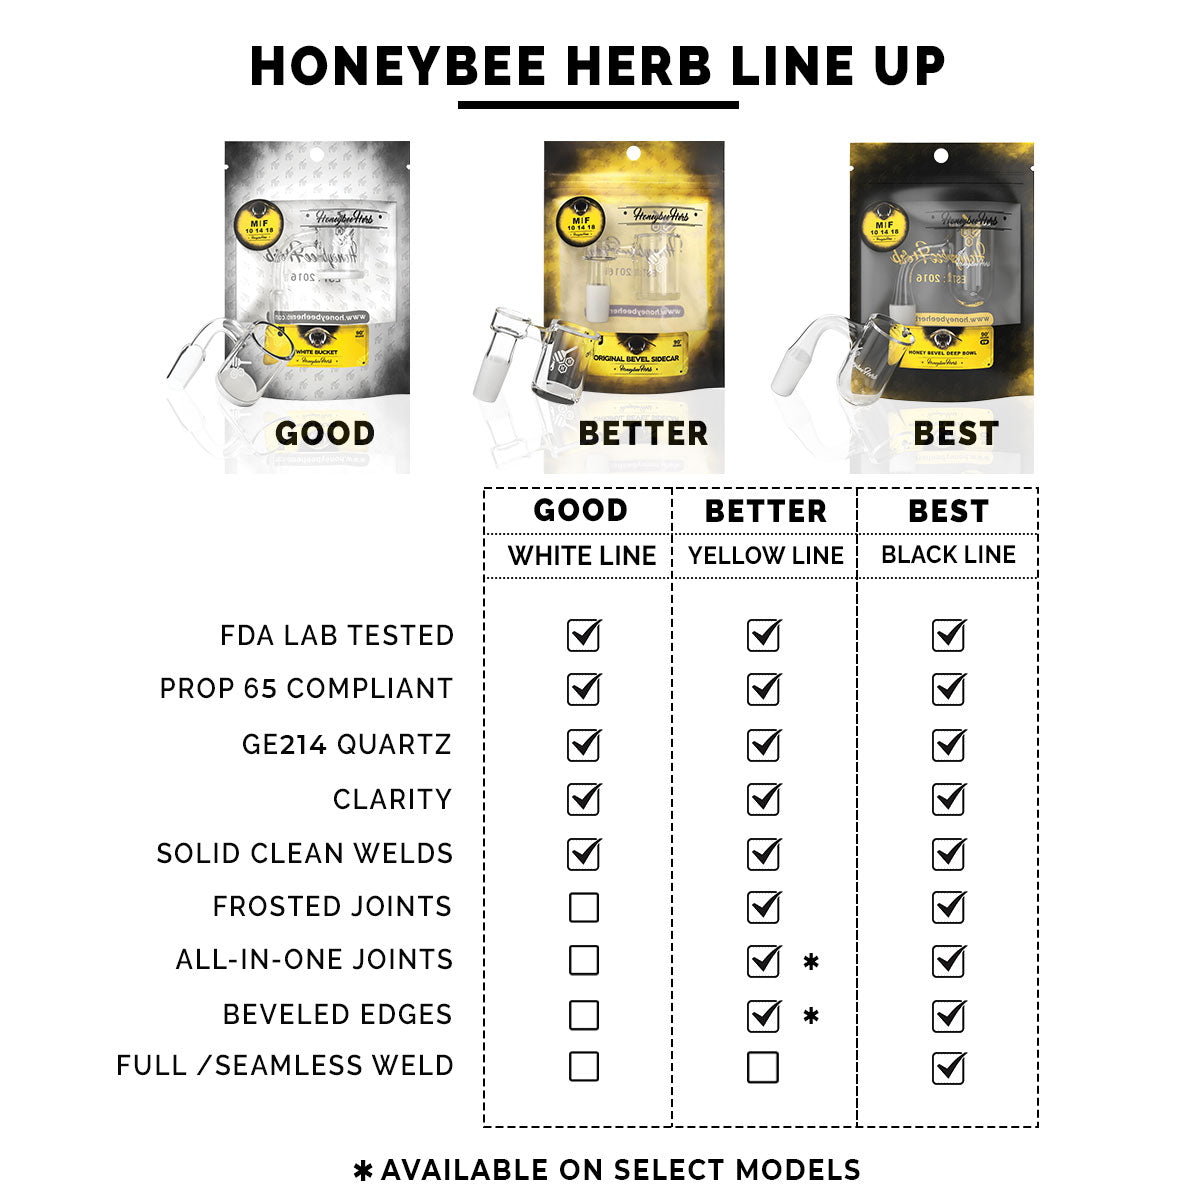 Honeybee Herb quartz banger comparison chart, showcasing quality tiers from good to best.